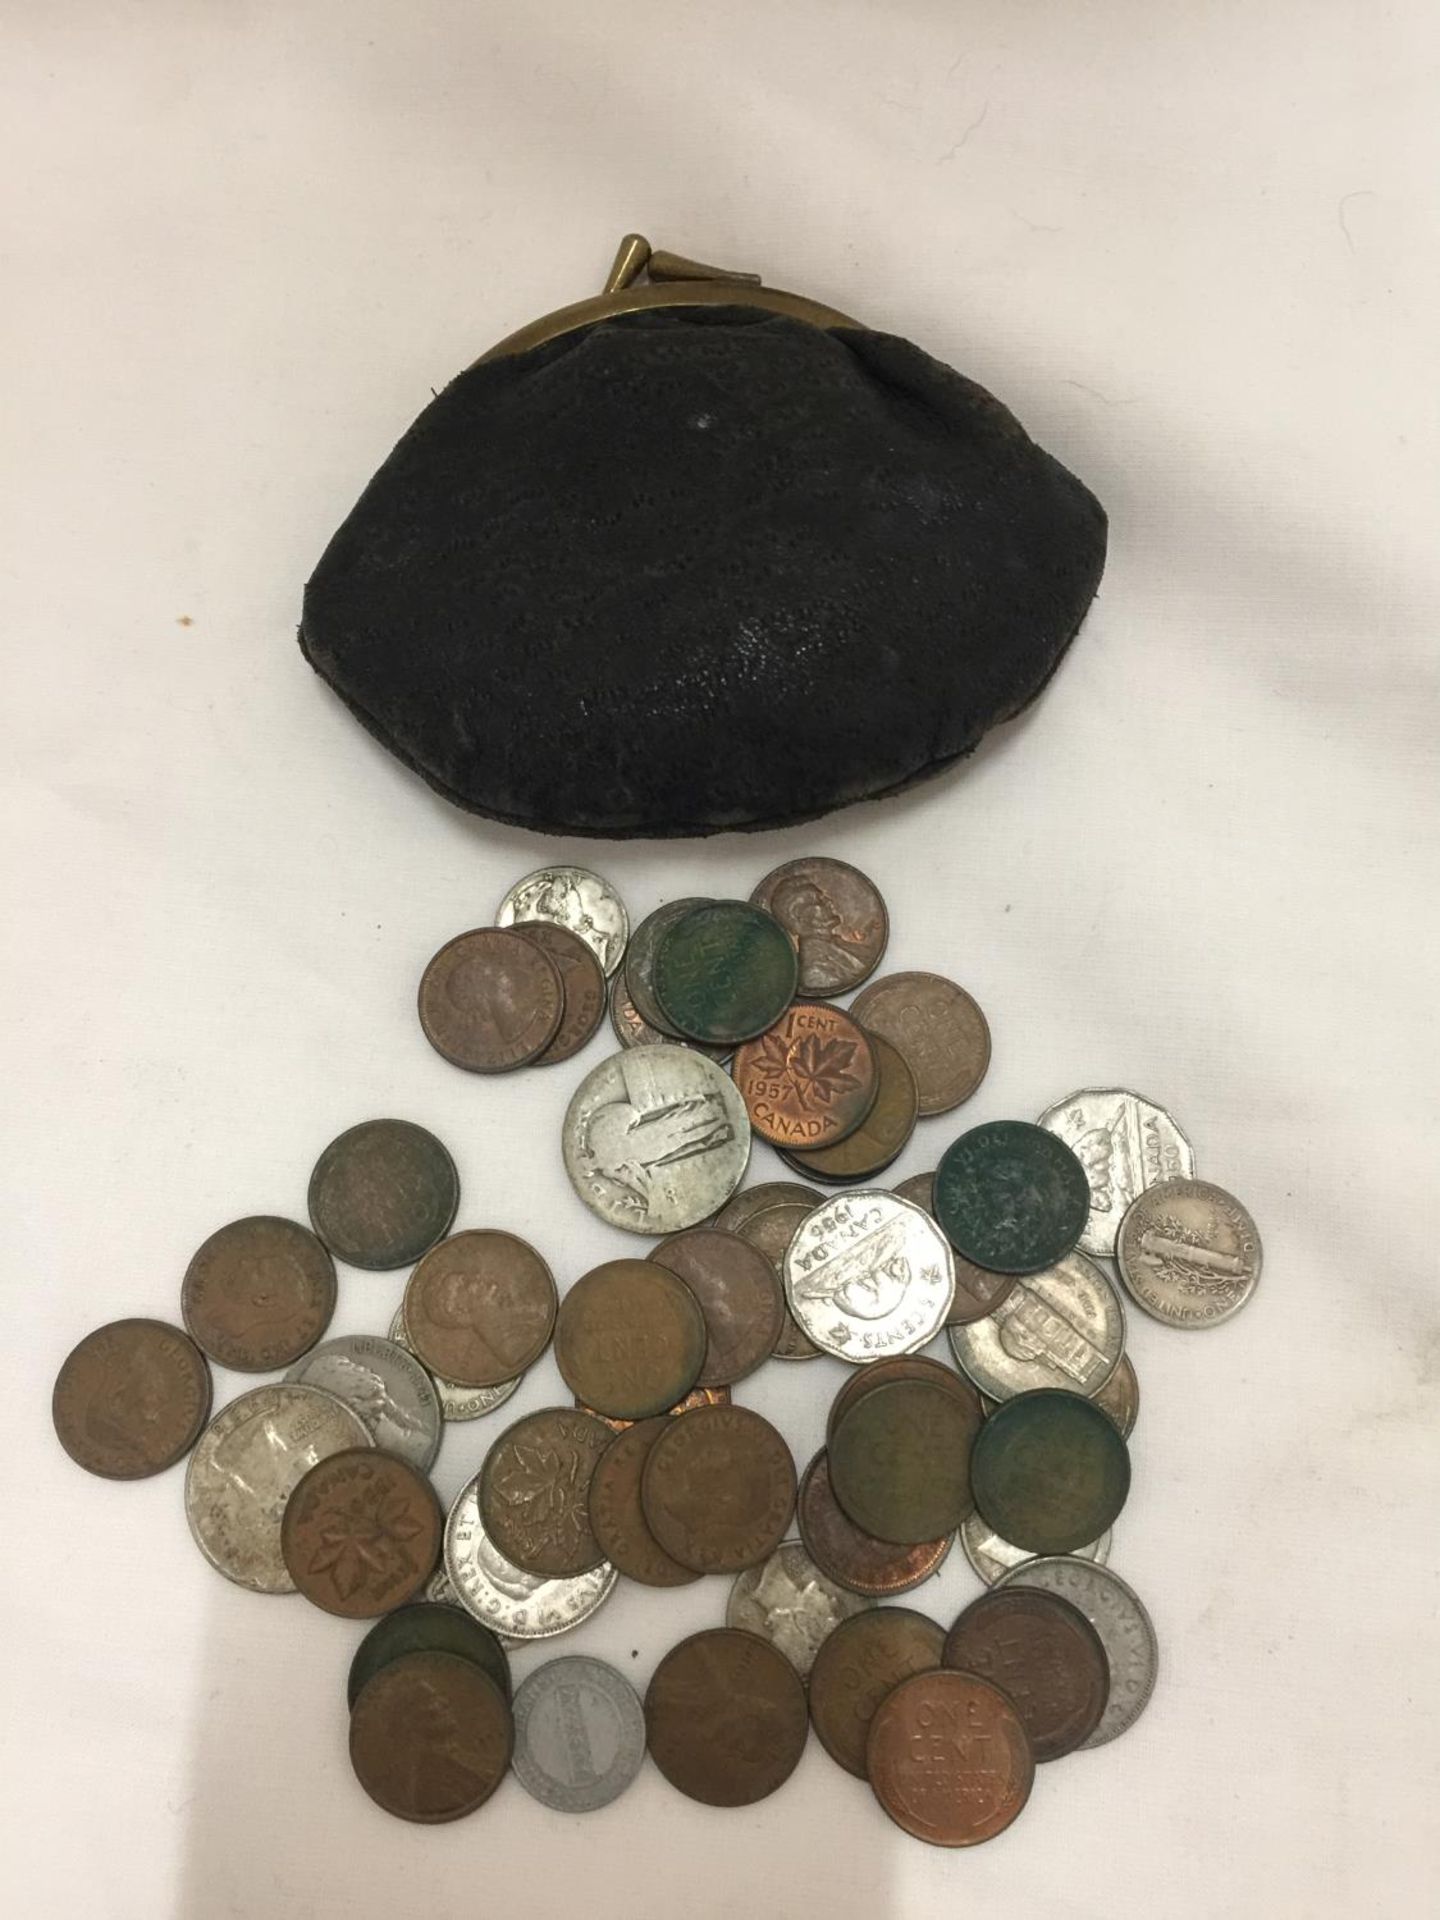 A VINTAGE AUTOGRAPH ALBUM AND A PURSE CONTAINING A QUANTITY OF VINTAGE FOREIGN COINS - Image 3 of 3